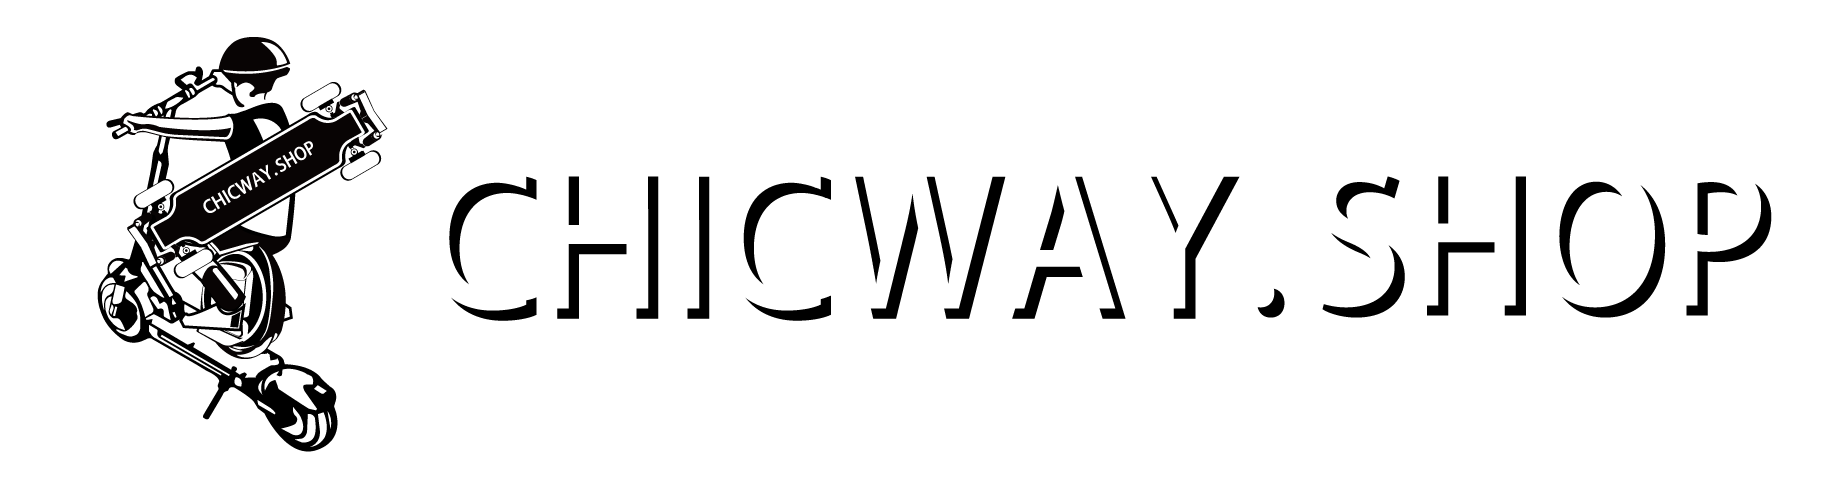 Chicway